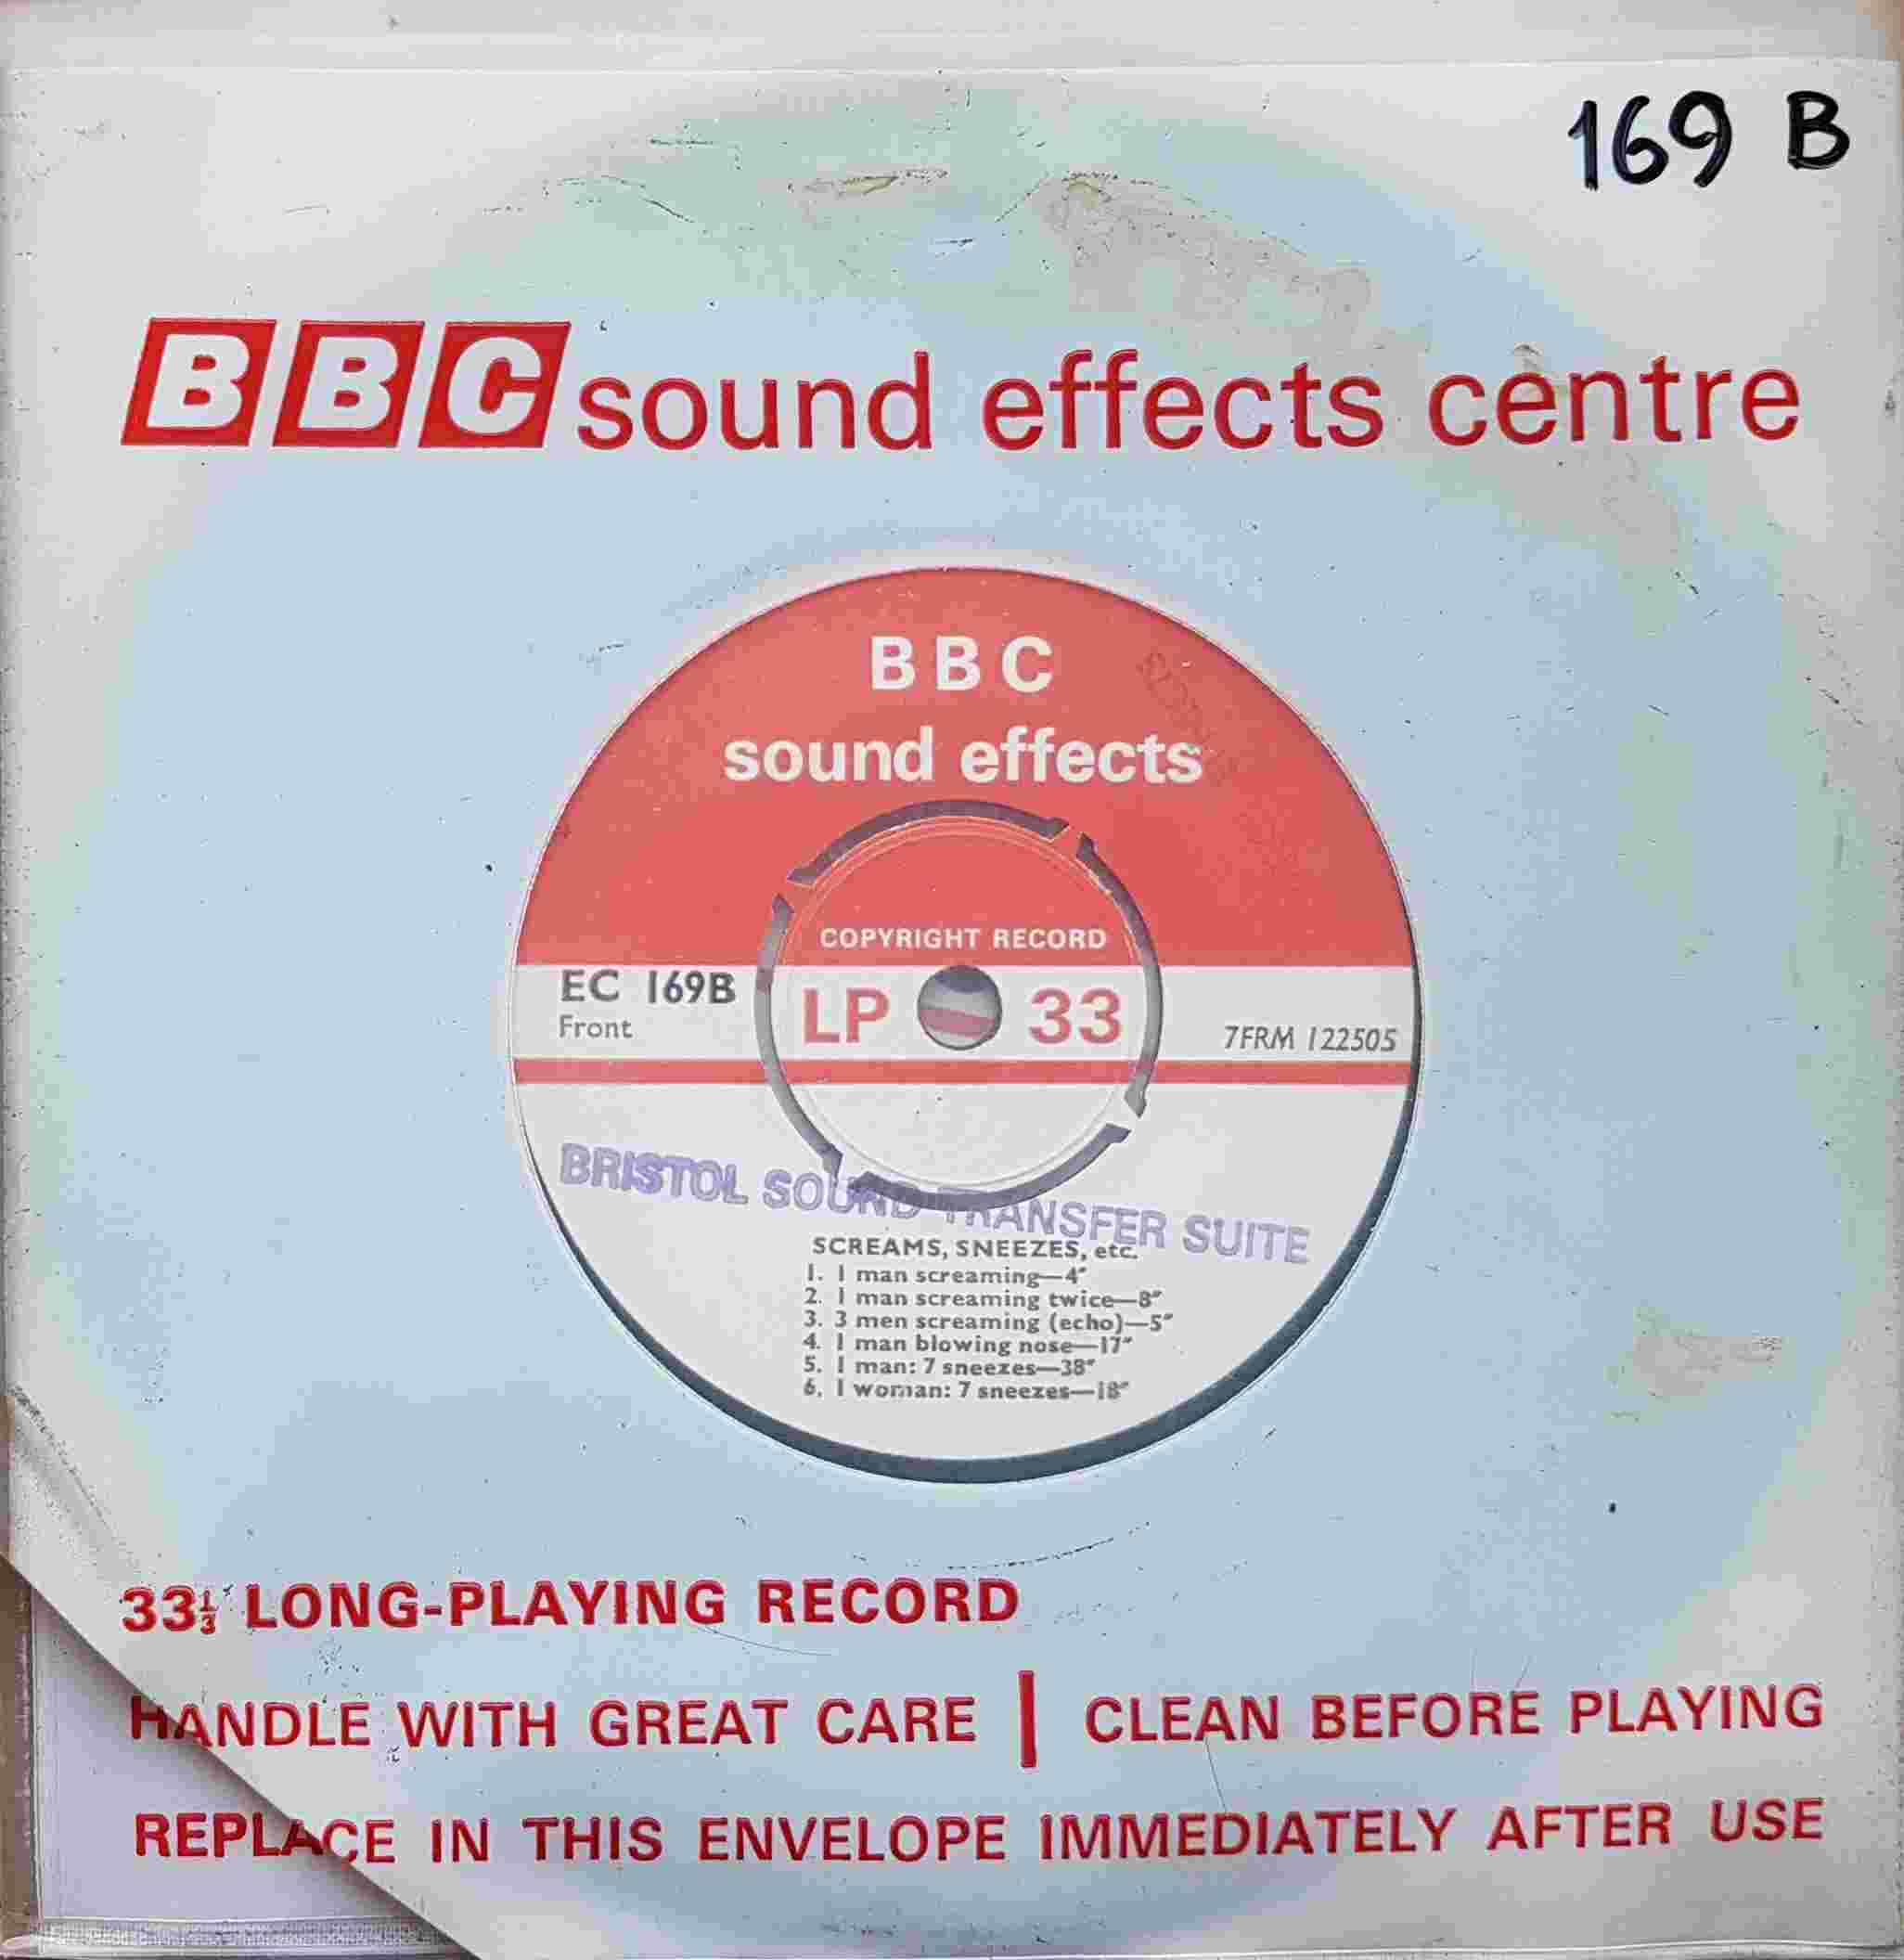 Picture of EC 169B Screams, sneezes, etc. / Coughing, breathing, etc. by artist Not registered from the BBC singles - Records and Tapes library